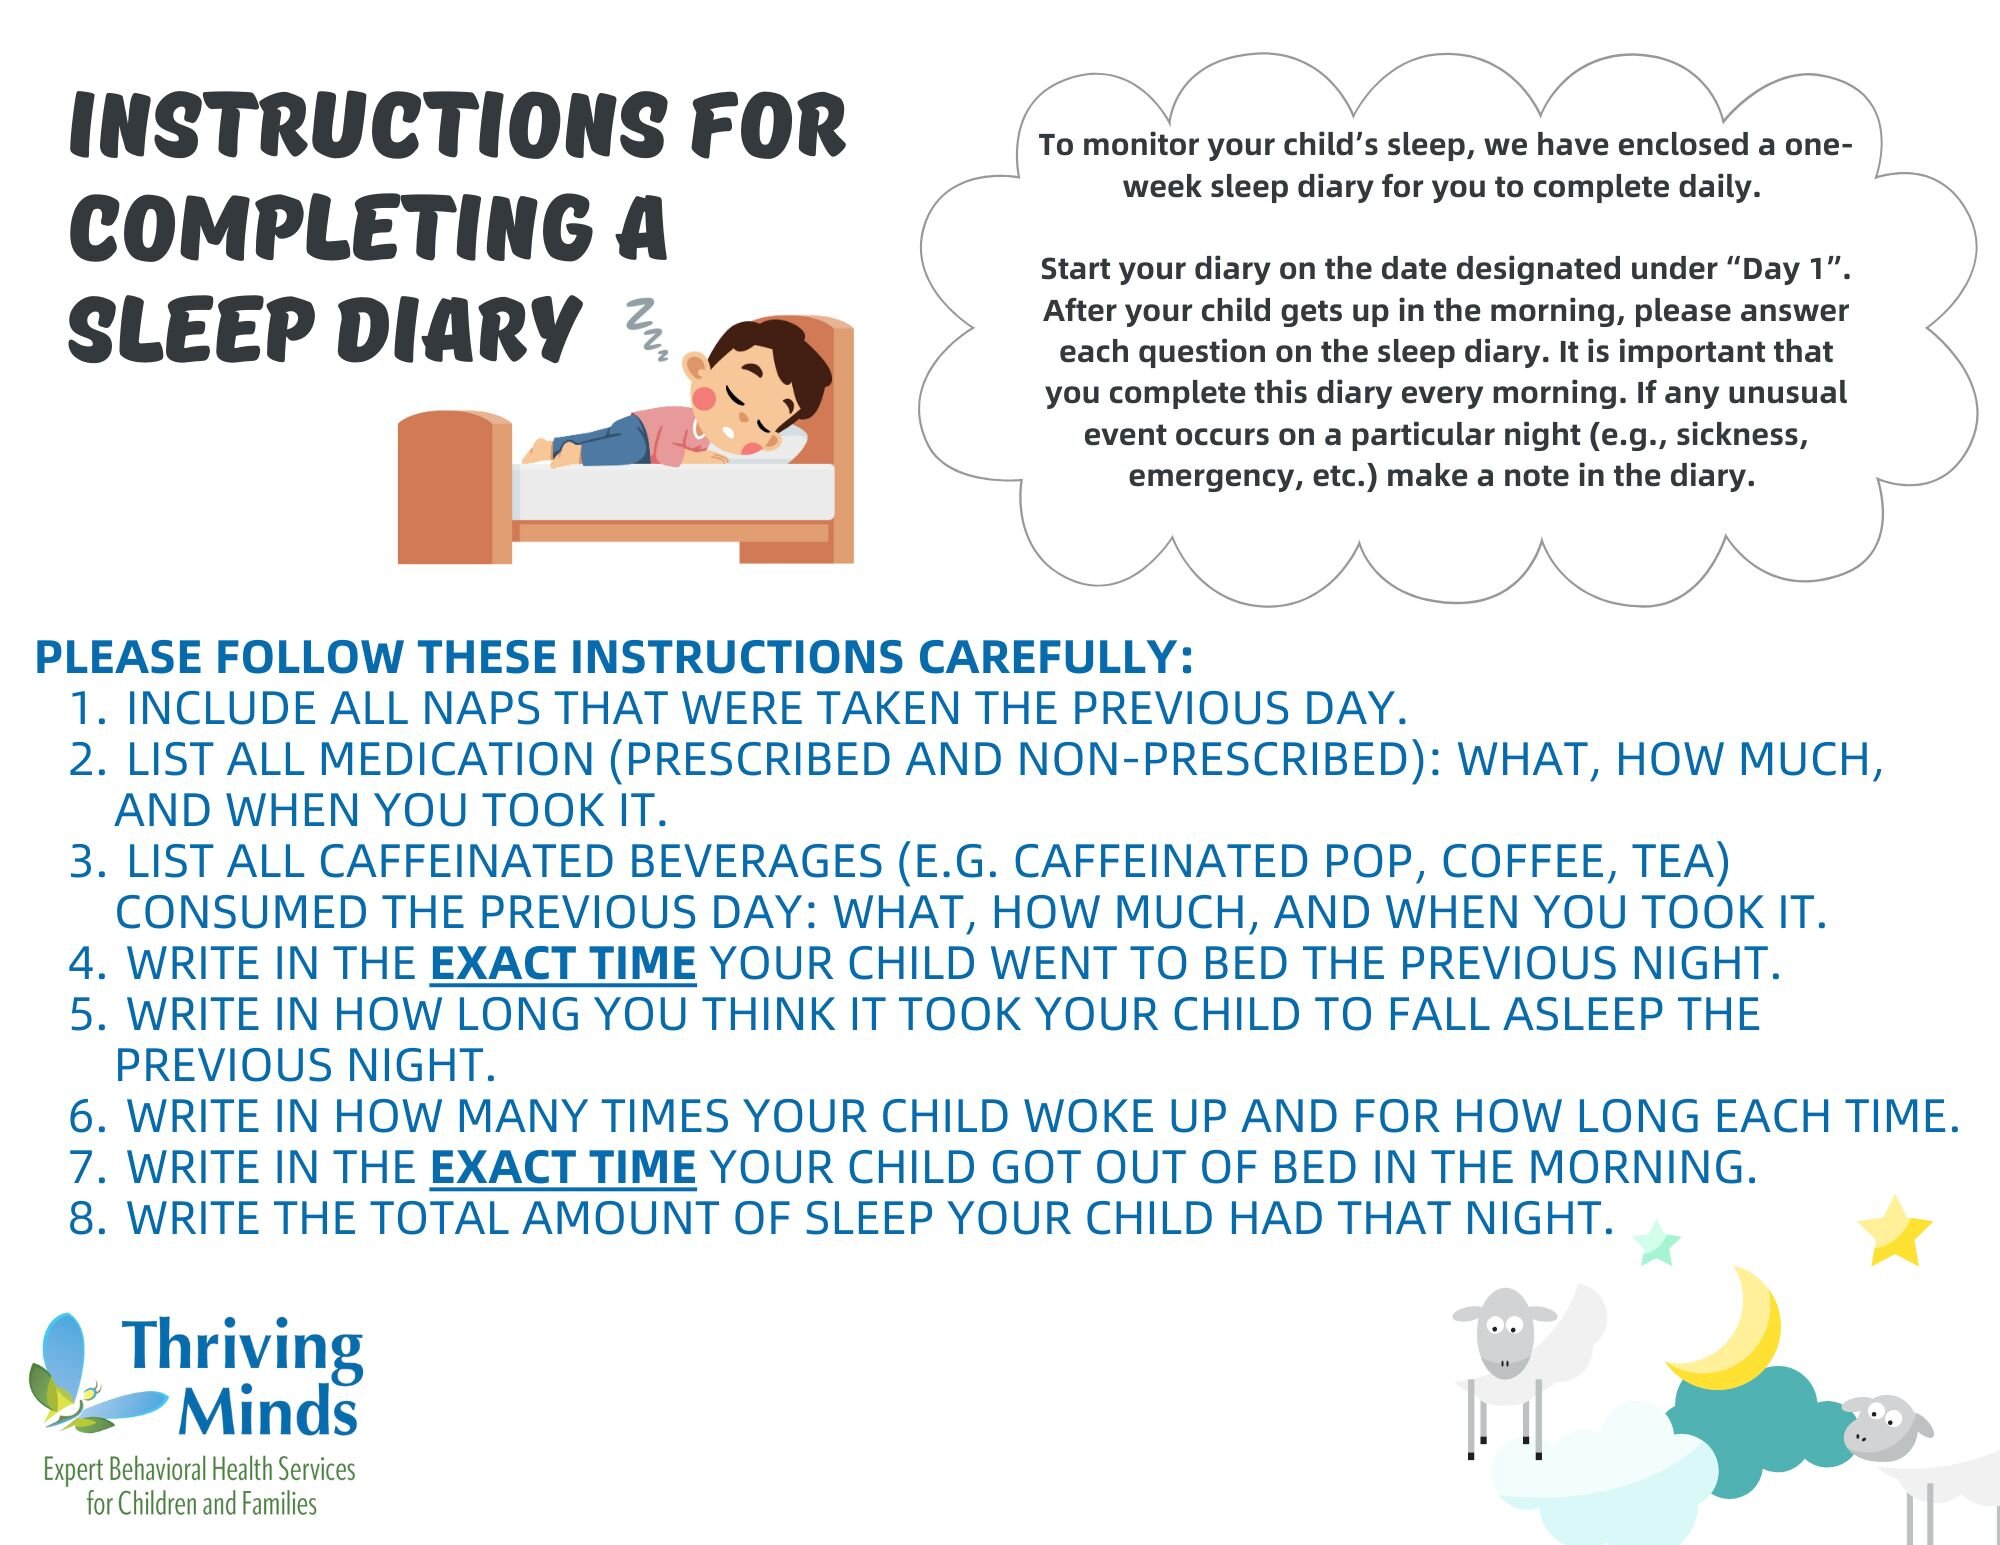 Does your child struggle with falling asleep, staying asleep, or waking up in the morning? Keeping a sleep diary is a great way to monitor your child's sleep-related issues and patterns to try and determine sleep problems. Some doctors may request sl